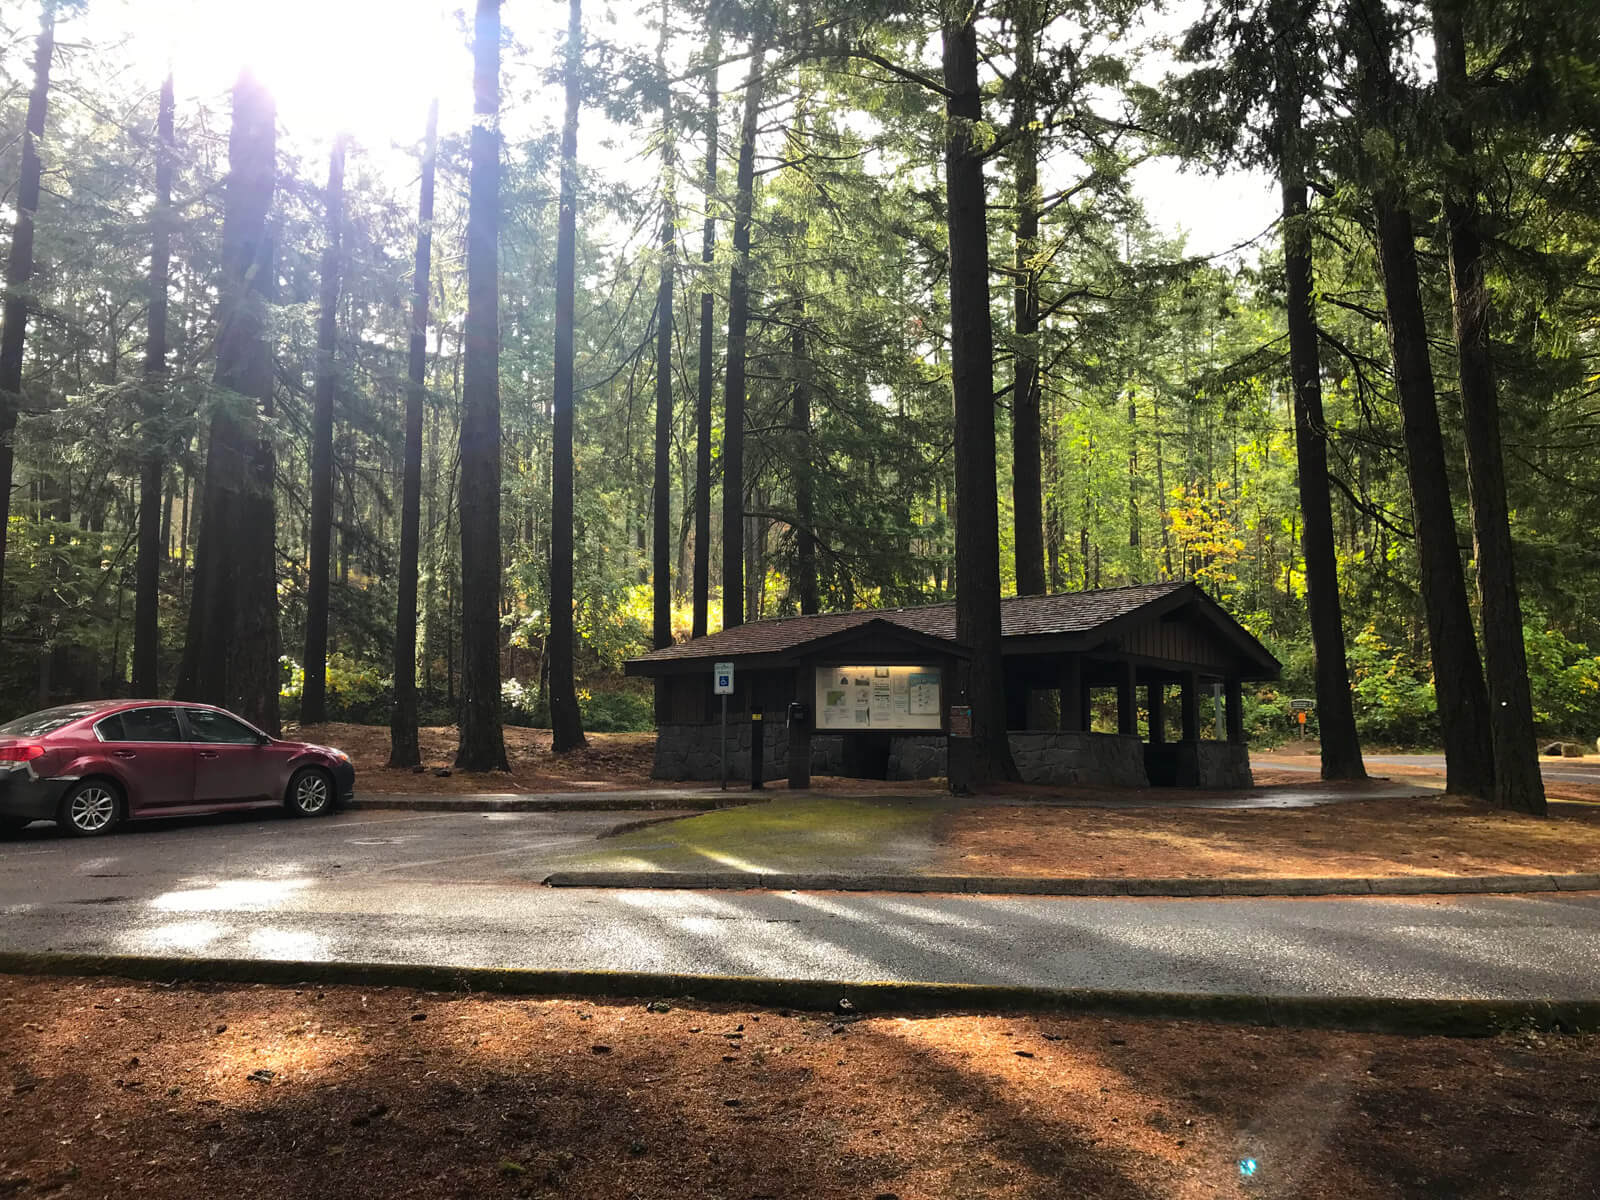 A small parking lot in the middle of a patch of very tall trees, like a forest. Sunlight is bleeding through the trees and there is a small building in centre of frame